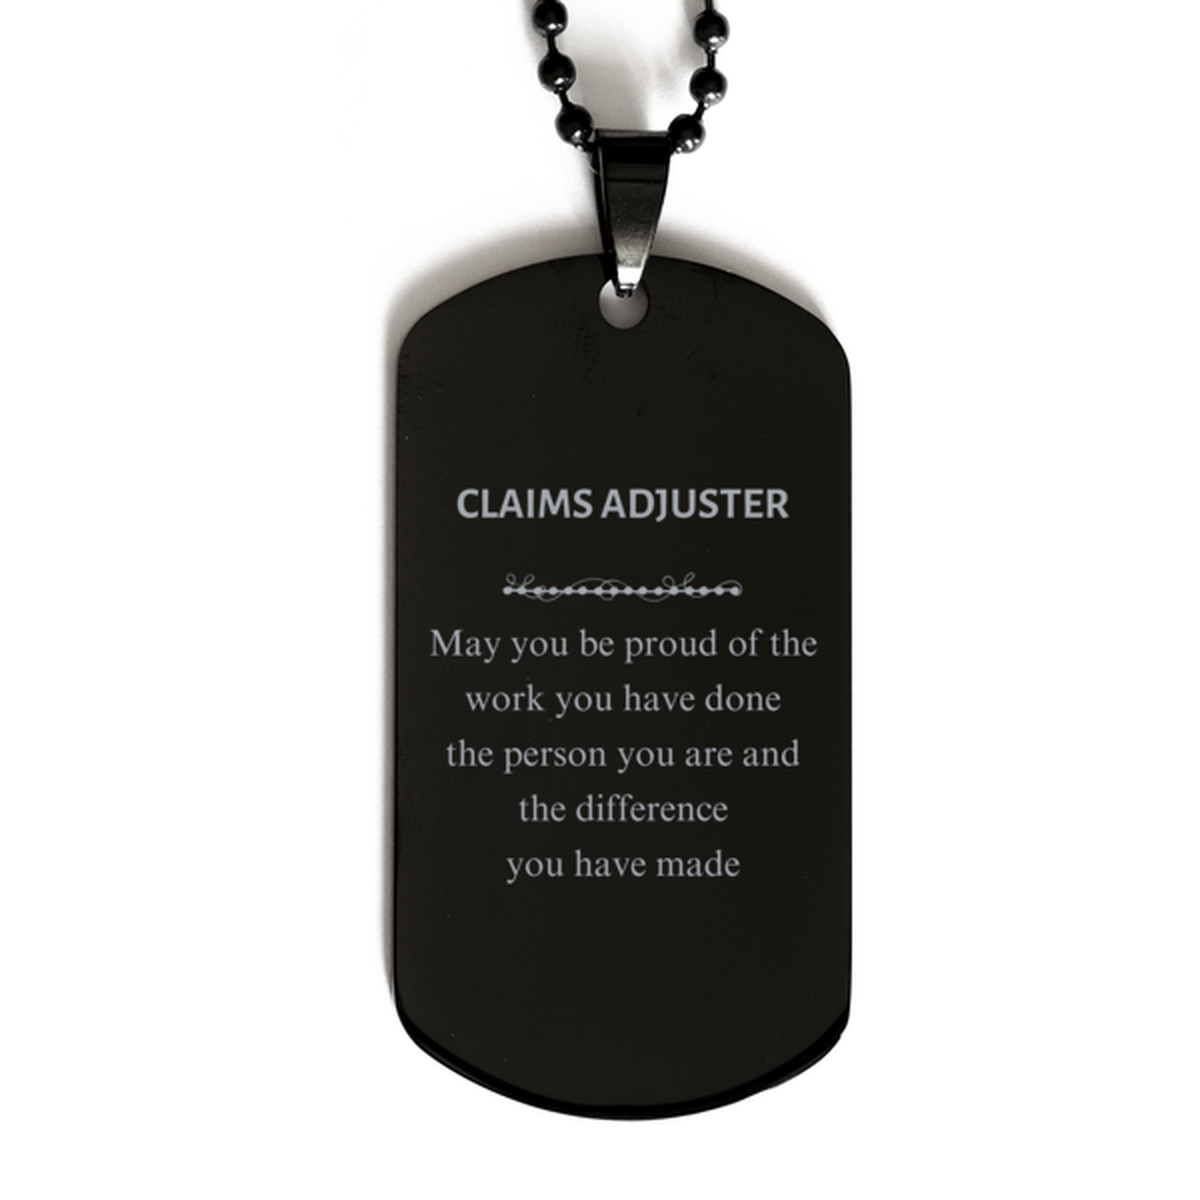 Claims Adjuster May you be proud of the work you have done, Retirement Claims Adjuster Black Dog Tag for Colleague Appreciation Gifts Amazing for Claims Adjuster